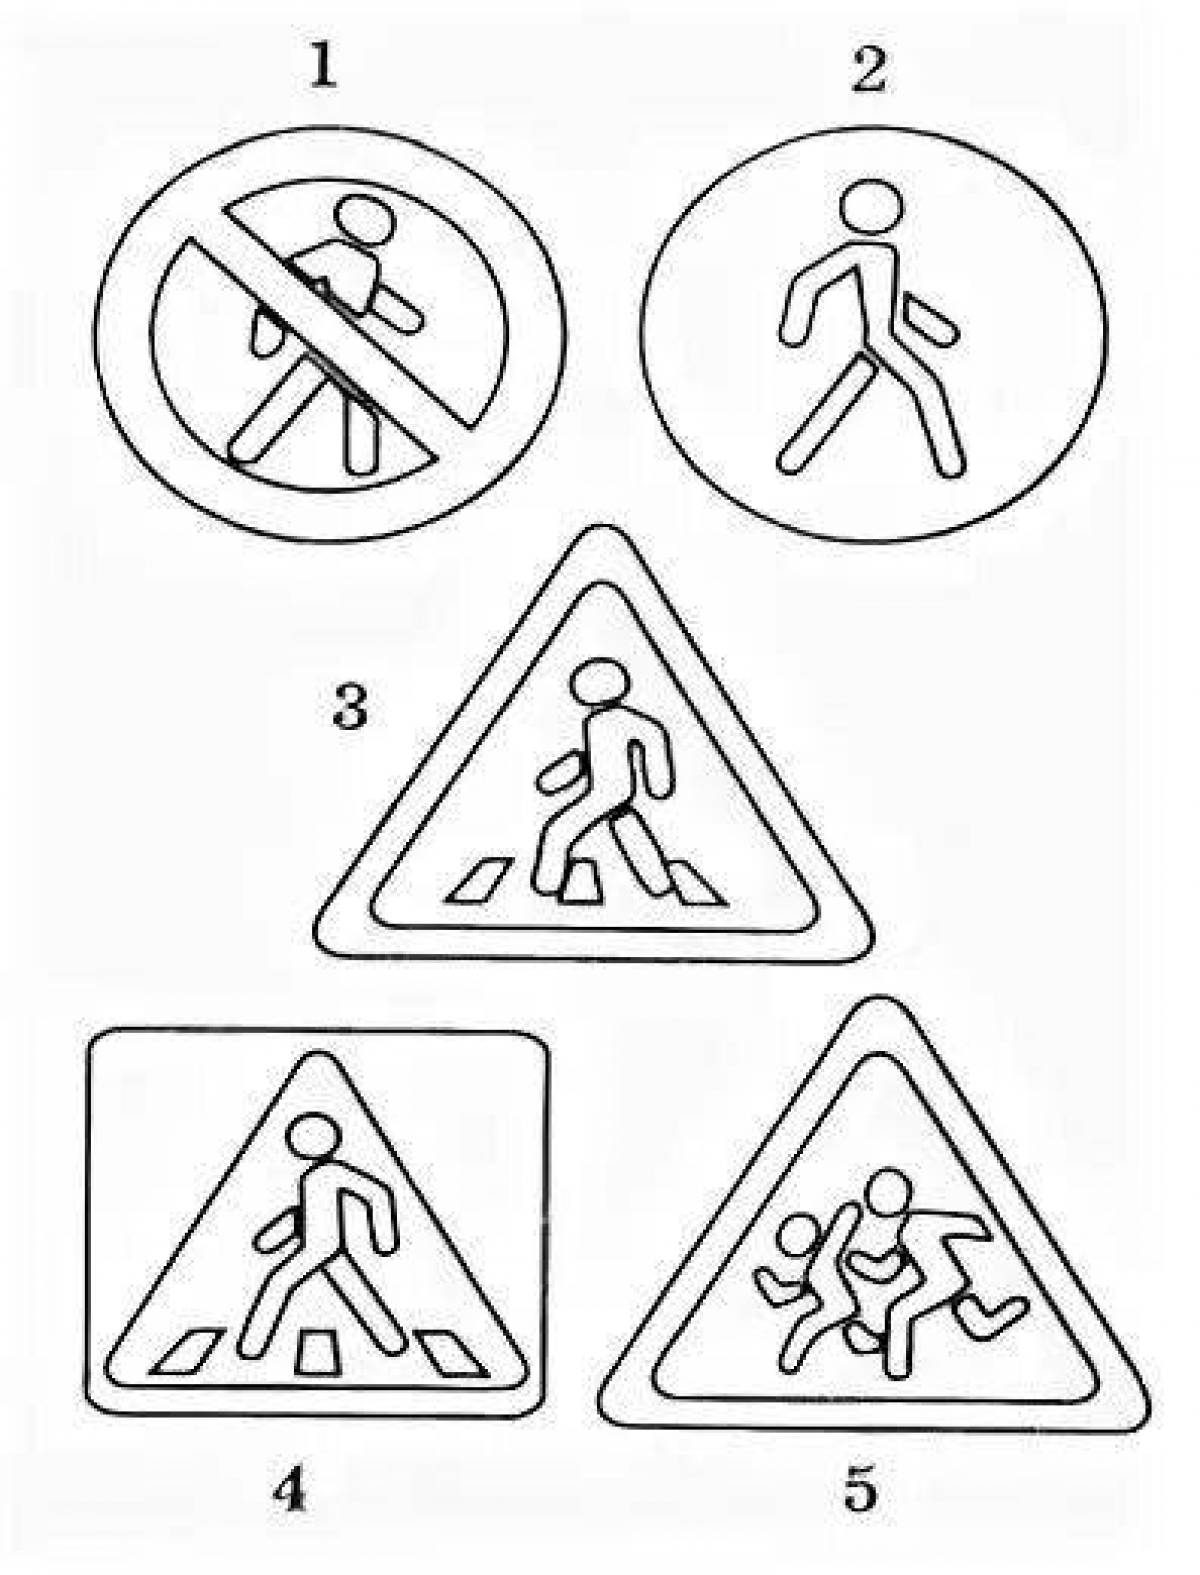 Traffic signs for kids in pictures #6